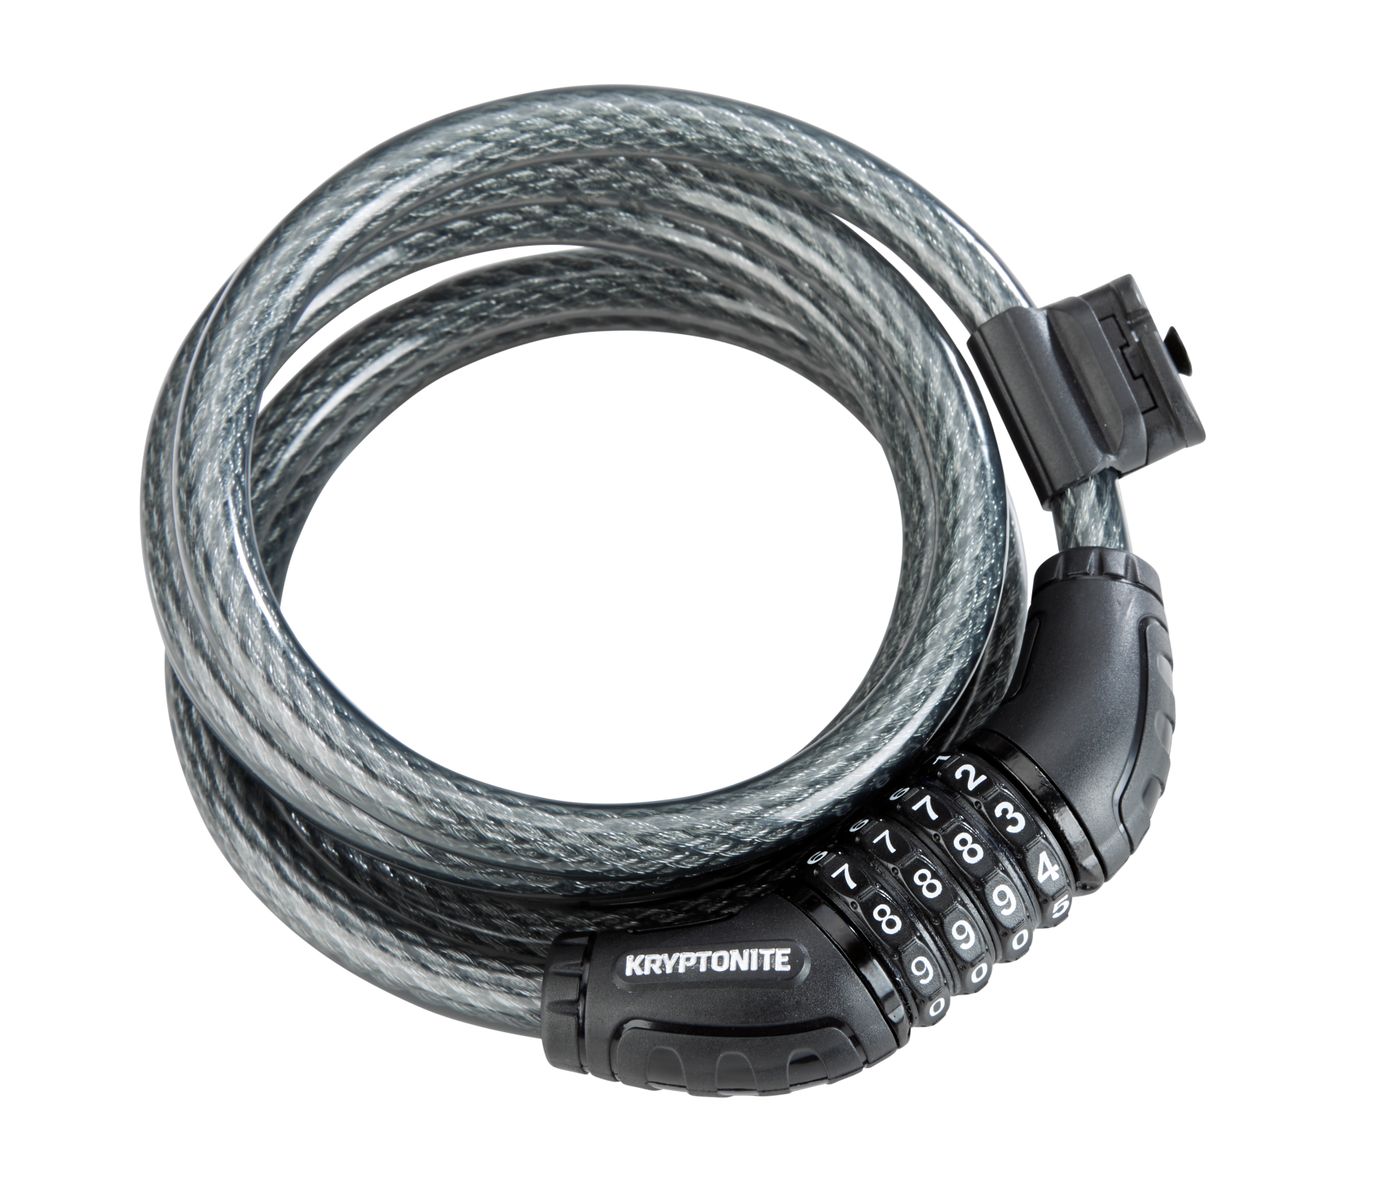 [RDY] [] Kryptonite Resettable 12mm Combo Cable Bicycle Lock [yVCOʔ] | Kryptonite Resettable 12mm Combo Cable Bicycle Lock